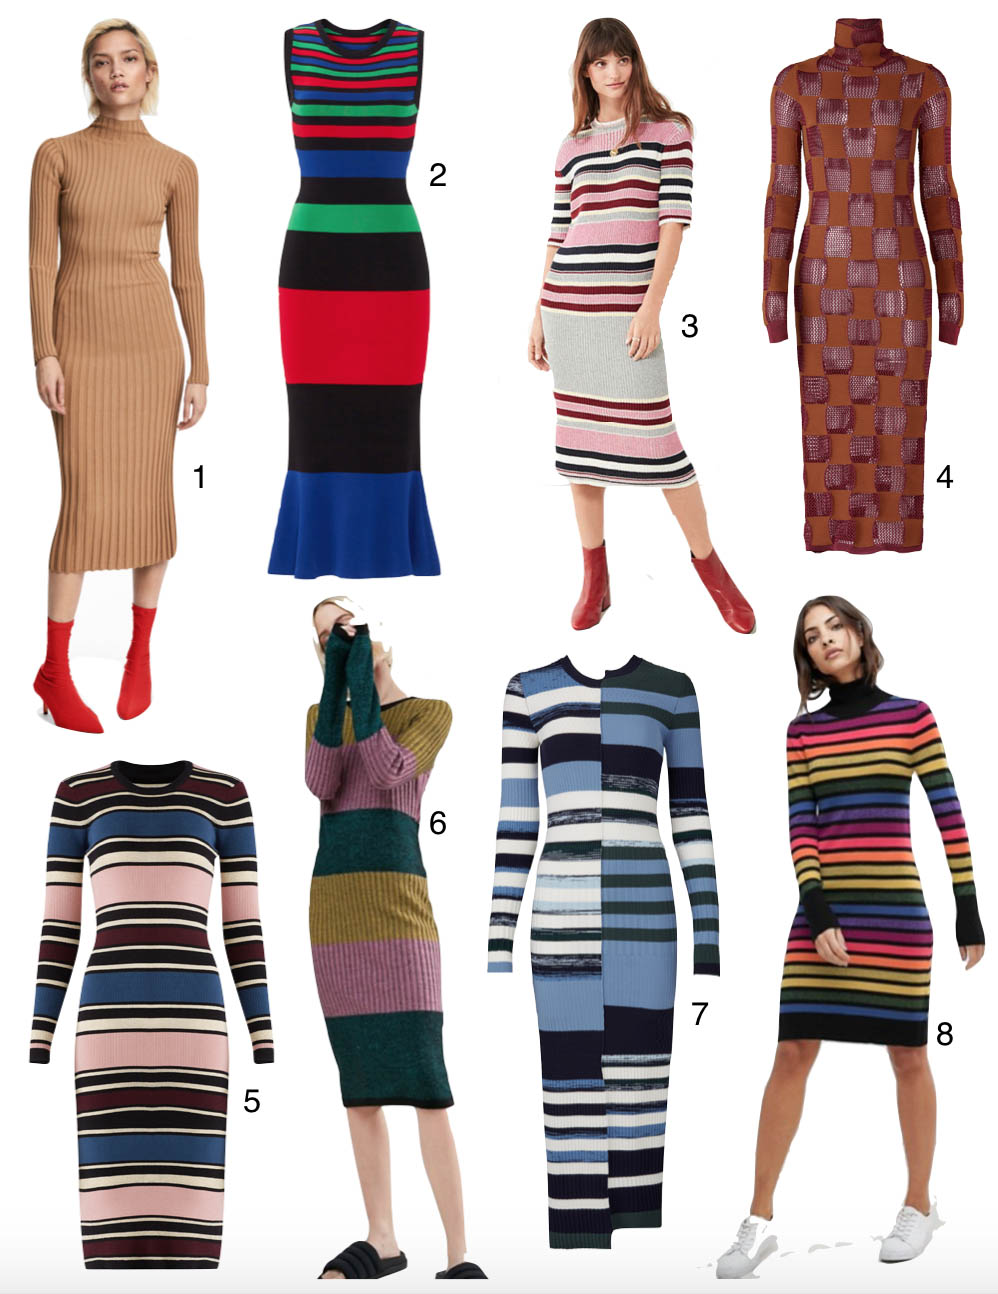 8 Knit Dresses to Make Going to Work in a Sleeping Bag Look Chic ...